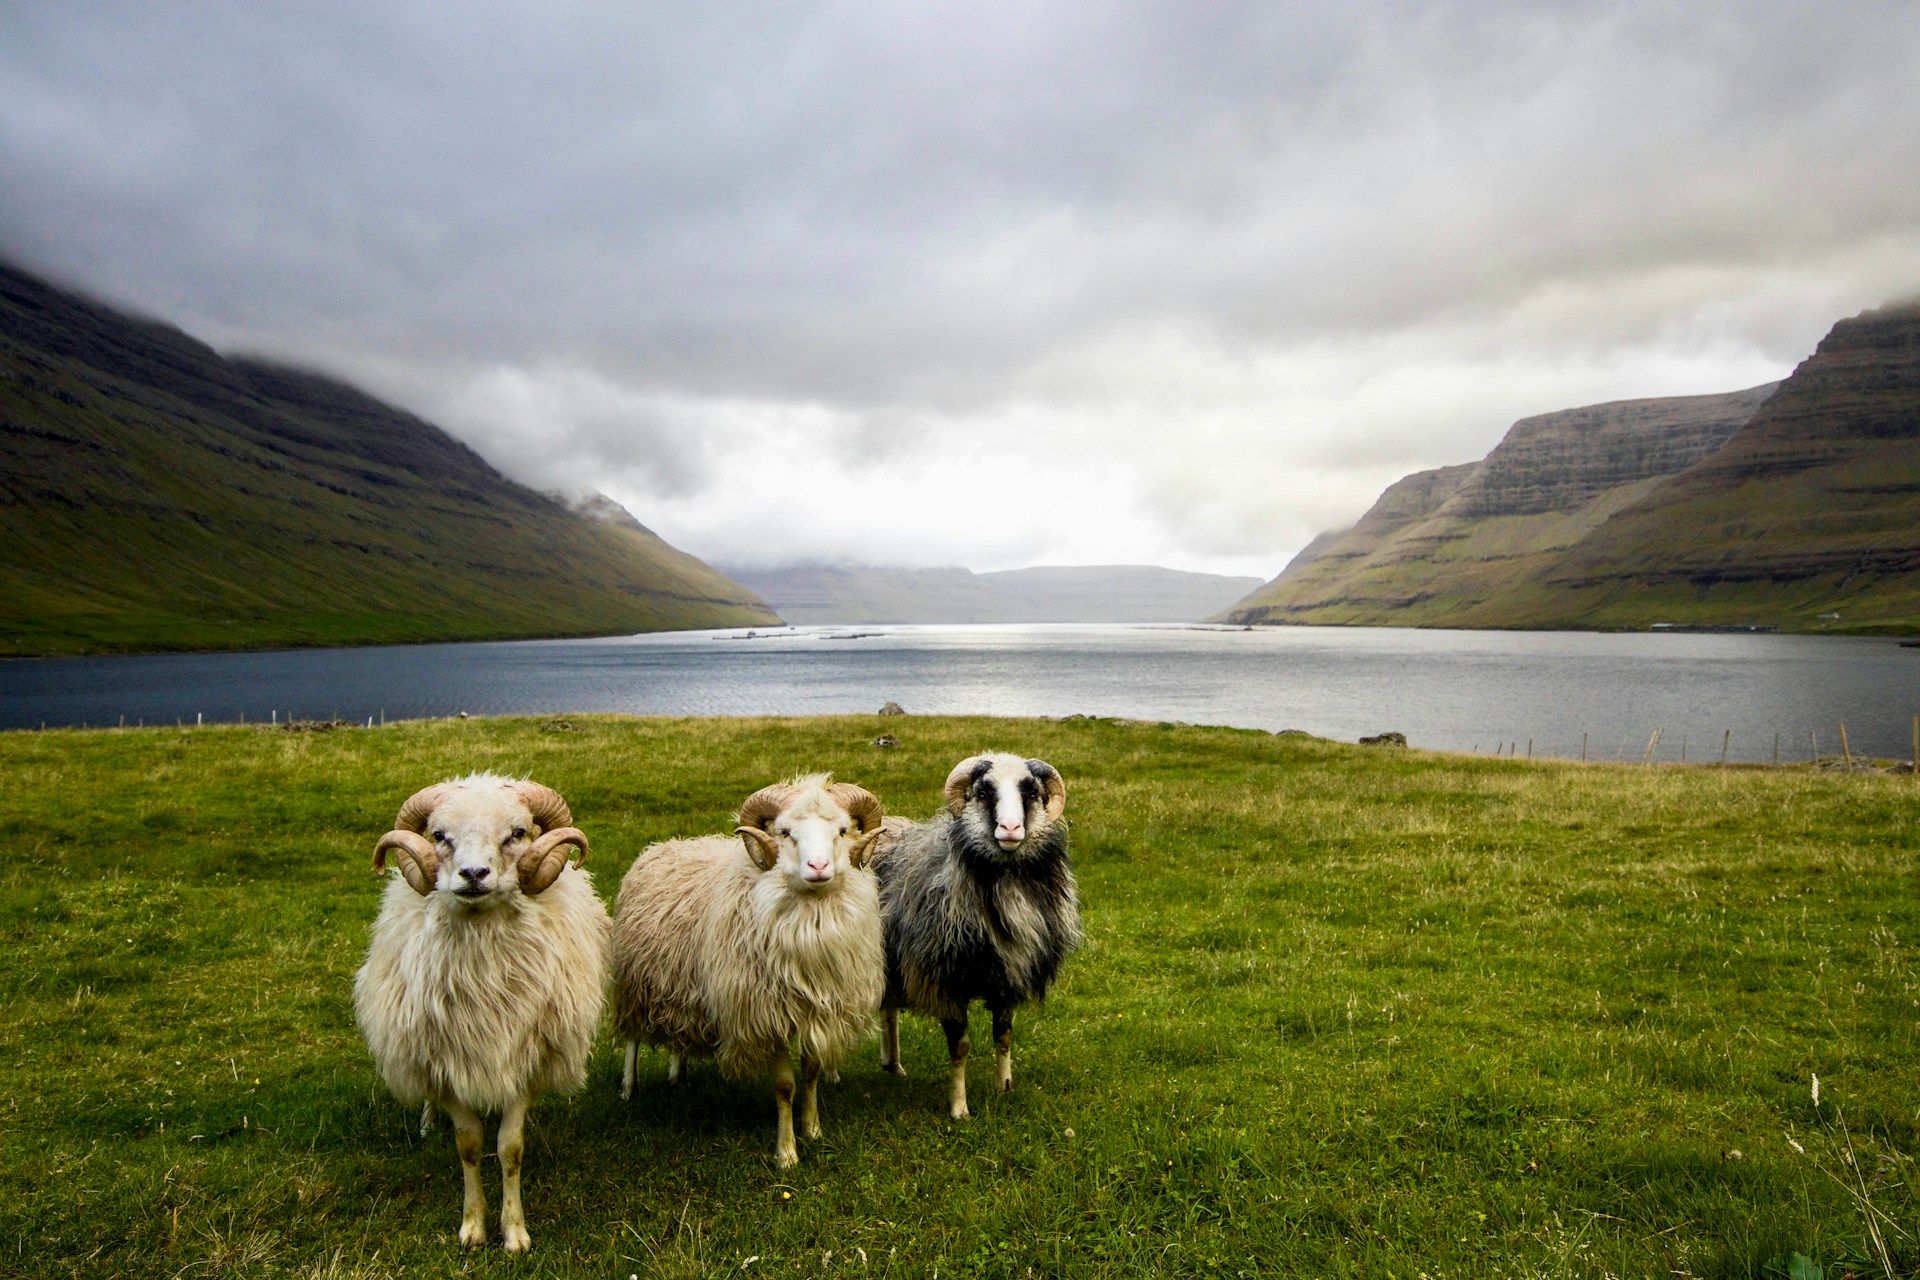 A group of sheep on Faroe Islands. Photo by Dylan Shaw.